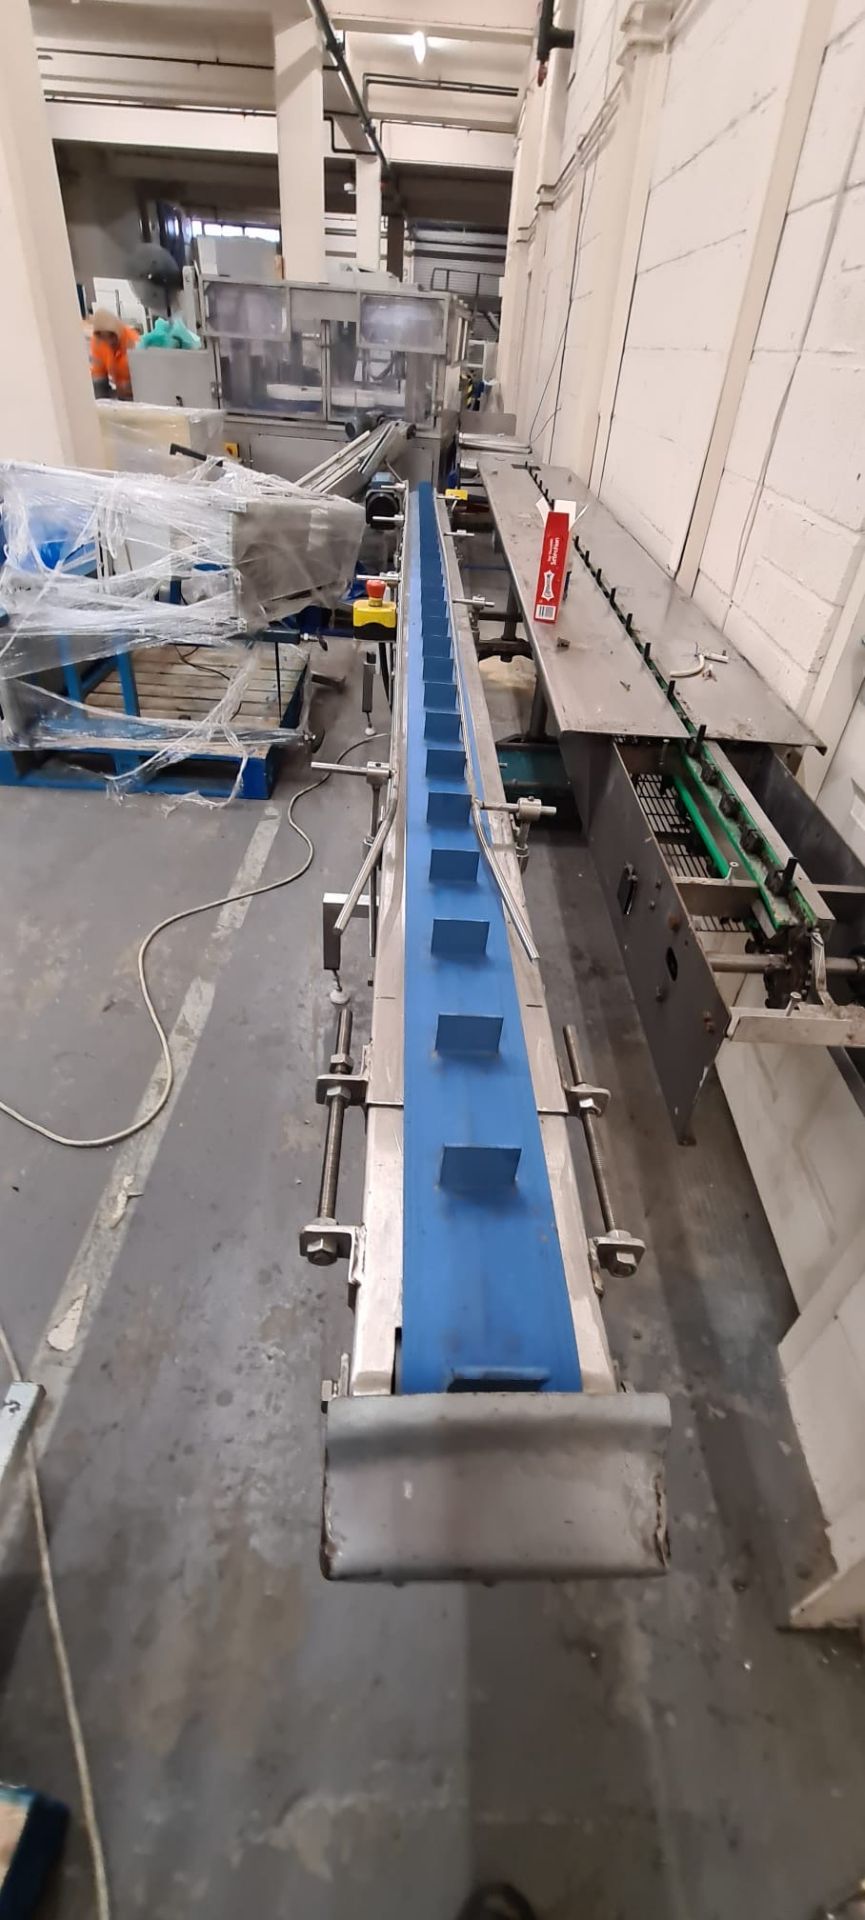 Stainless Steel Framed Separating Belt Conveyor, 3600L x 150w, buyers responsibility to load, lot - Image 2 of 2